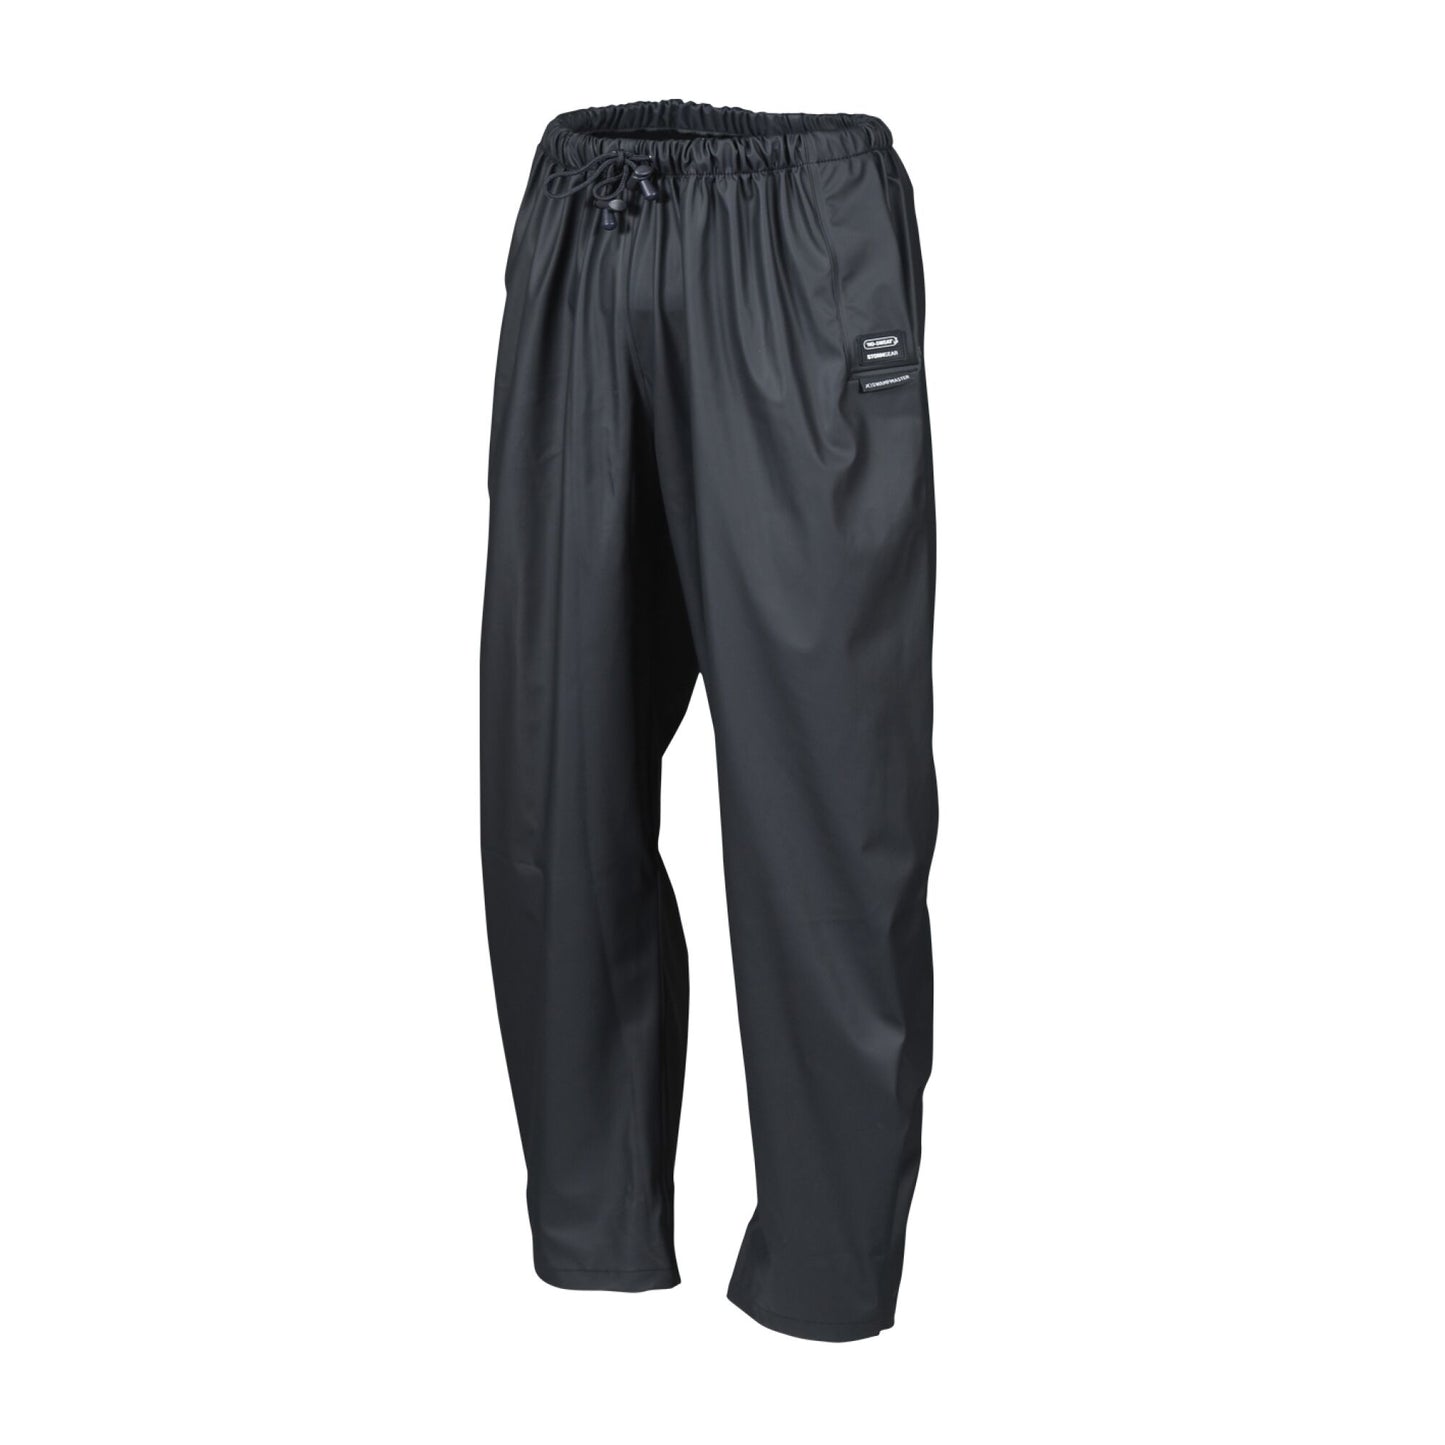 Swampmaster No-Sweat Thermgear Waterproof Lined Trouser - Navy